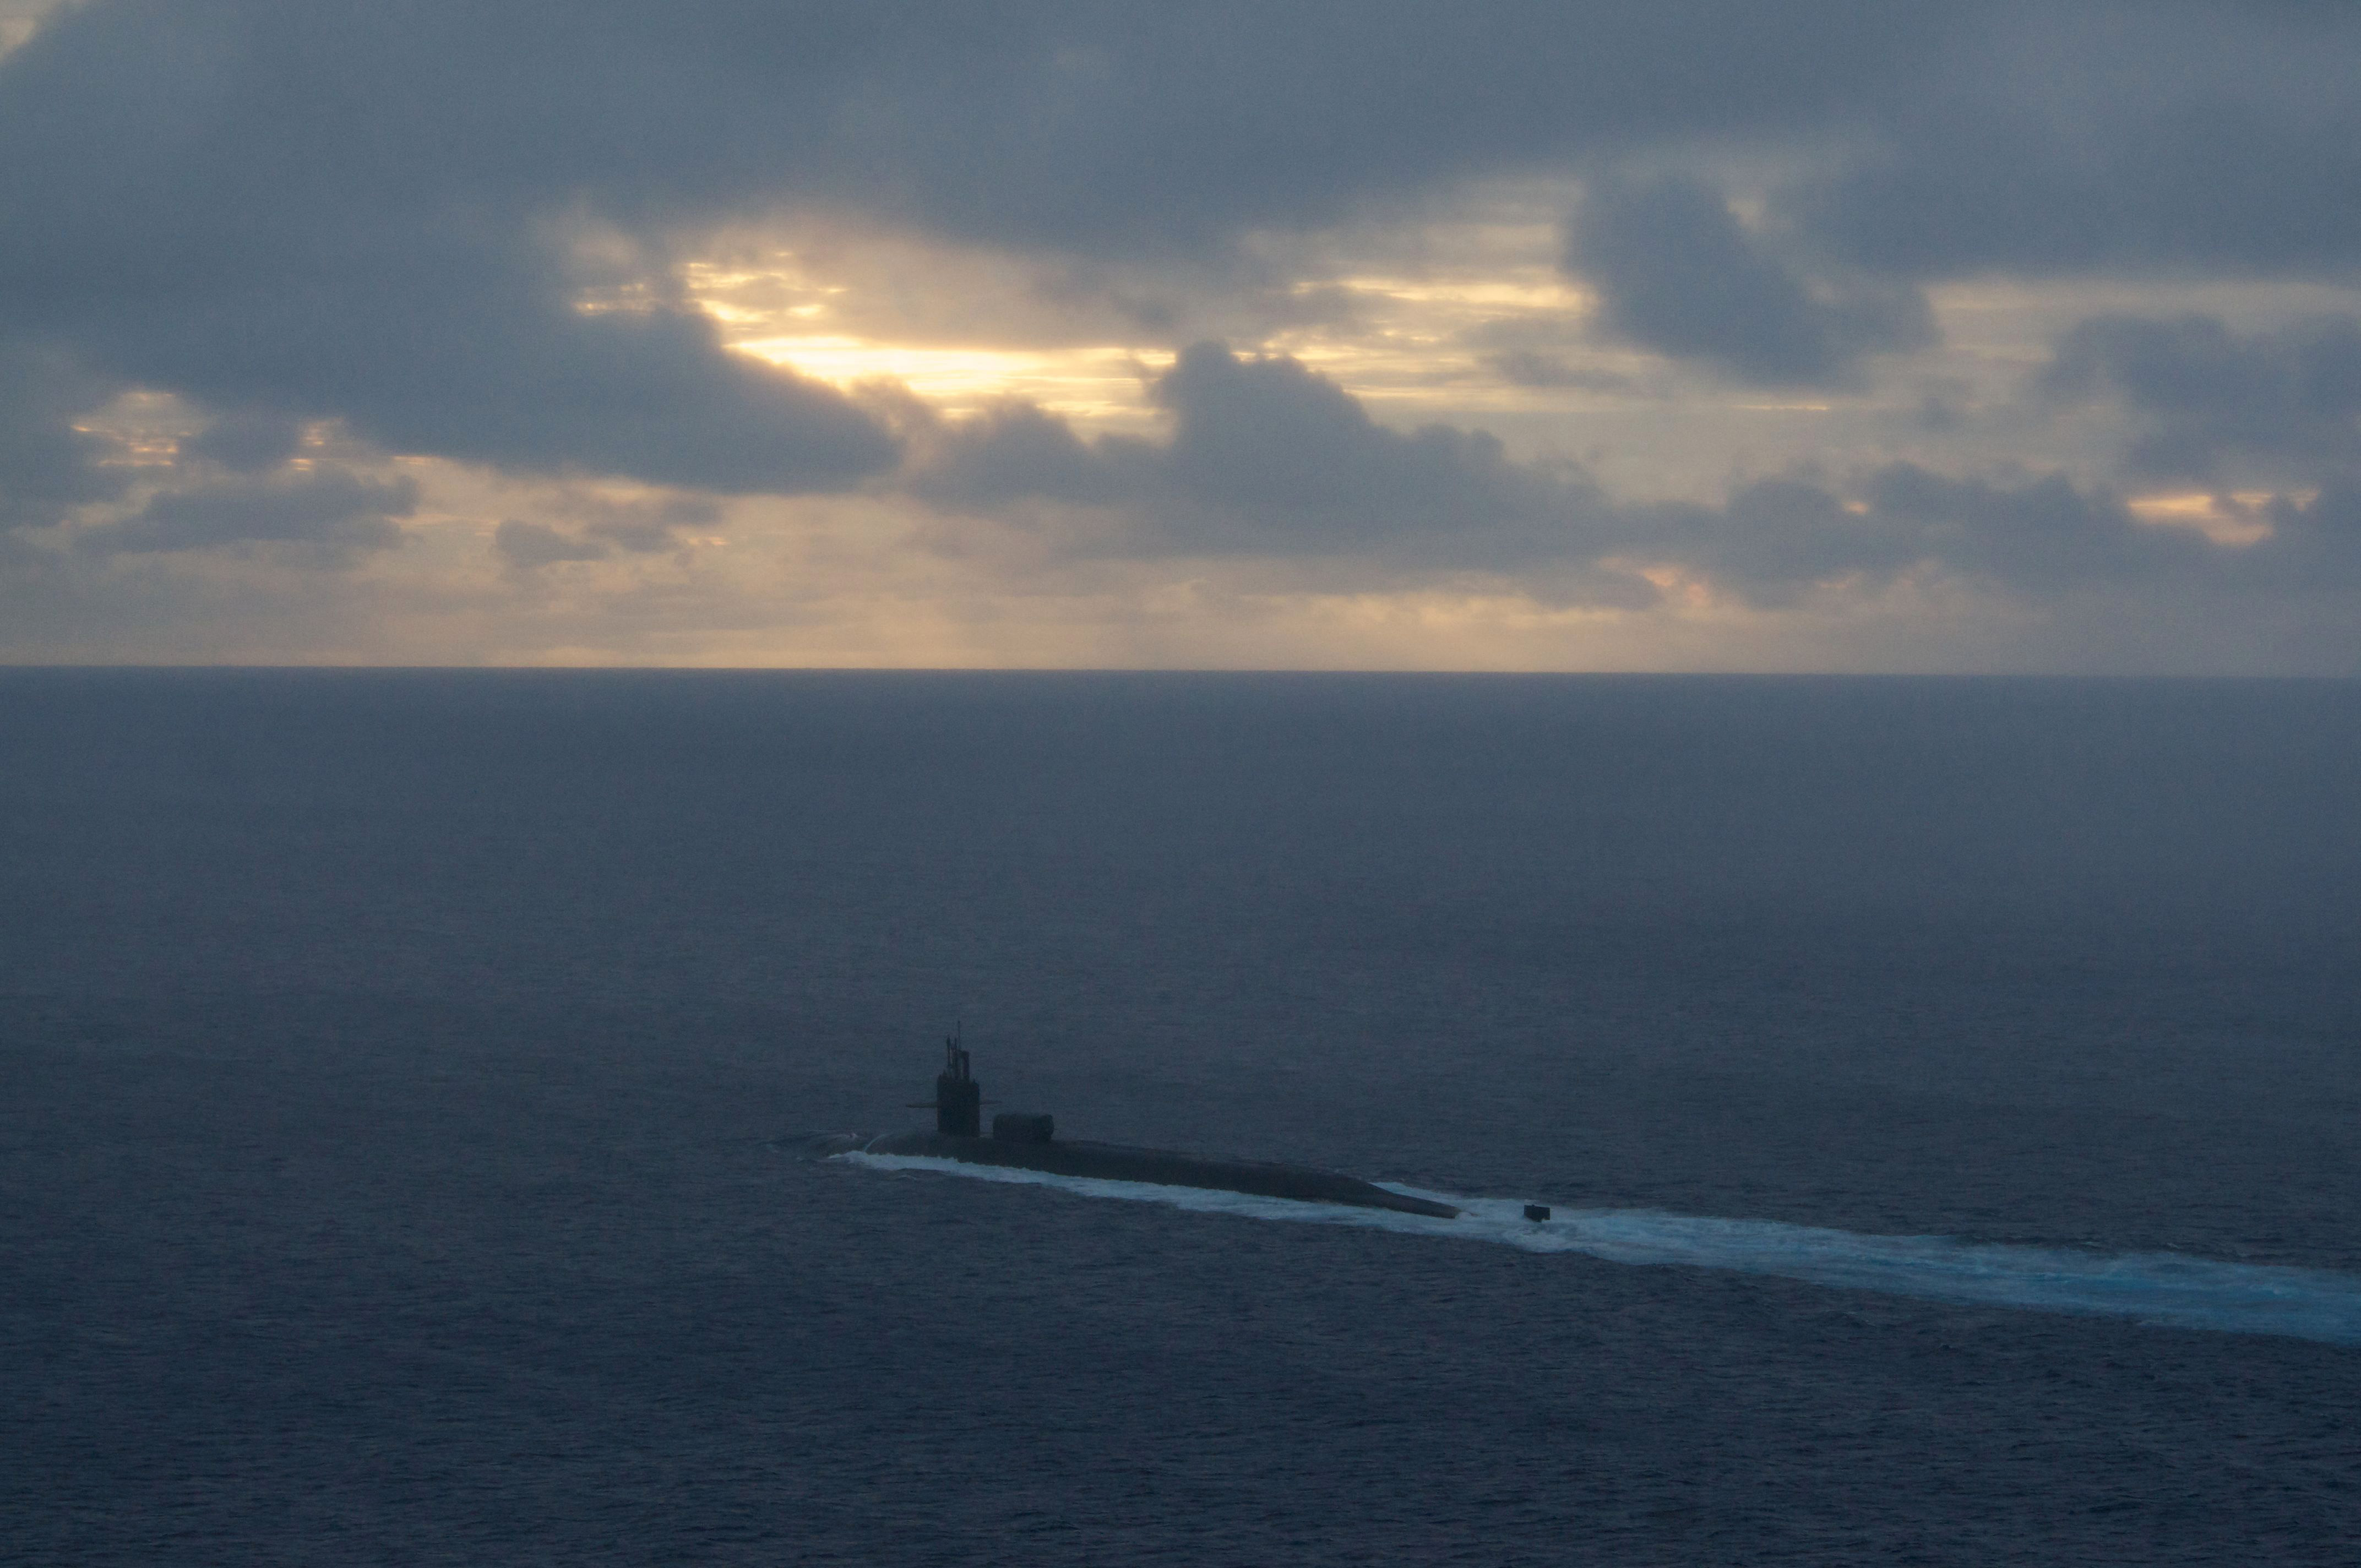 Ohio-class guided missile submarine USS Michigan (SSGN-727) heads out to sea in 2012, US Navy Photo